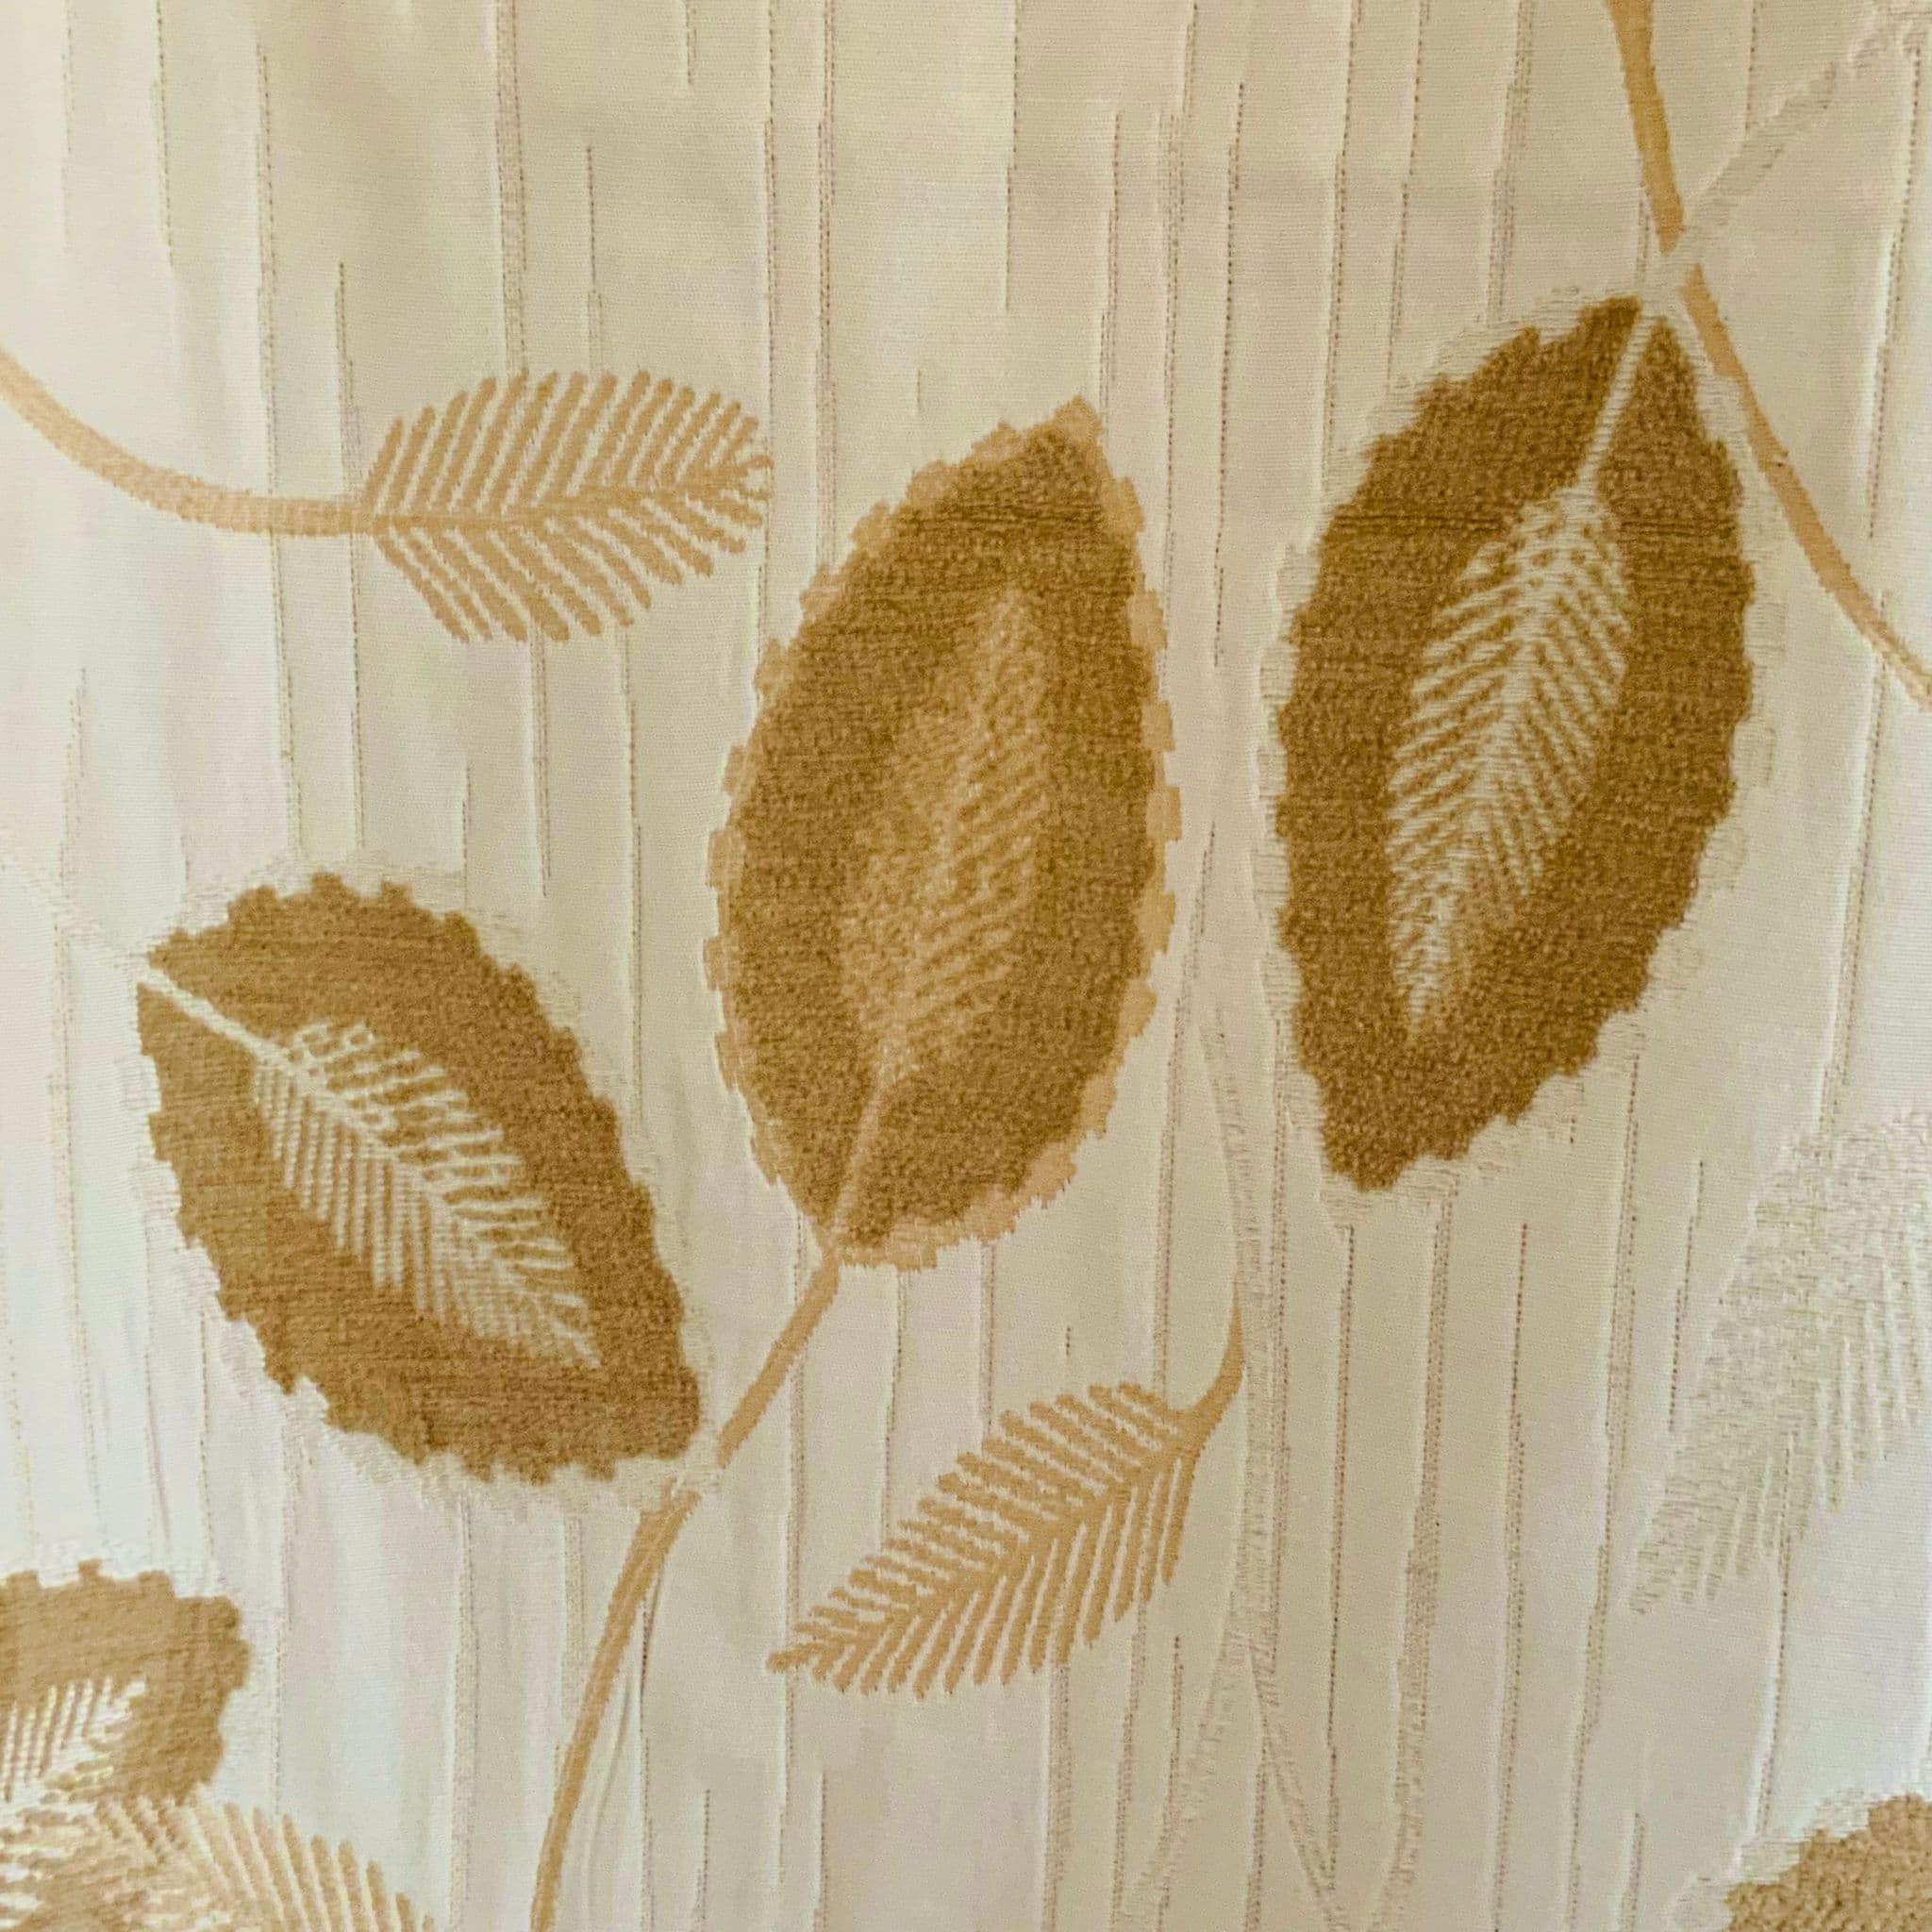 Quilted Chenille Cream Fabric in Trailing Leaves Design.   1.1 mts